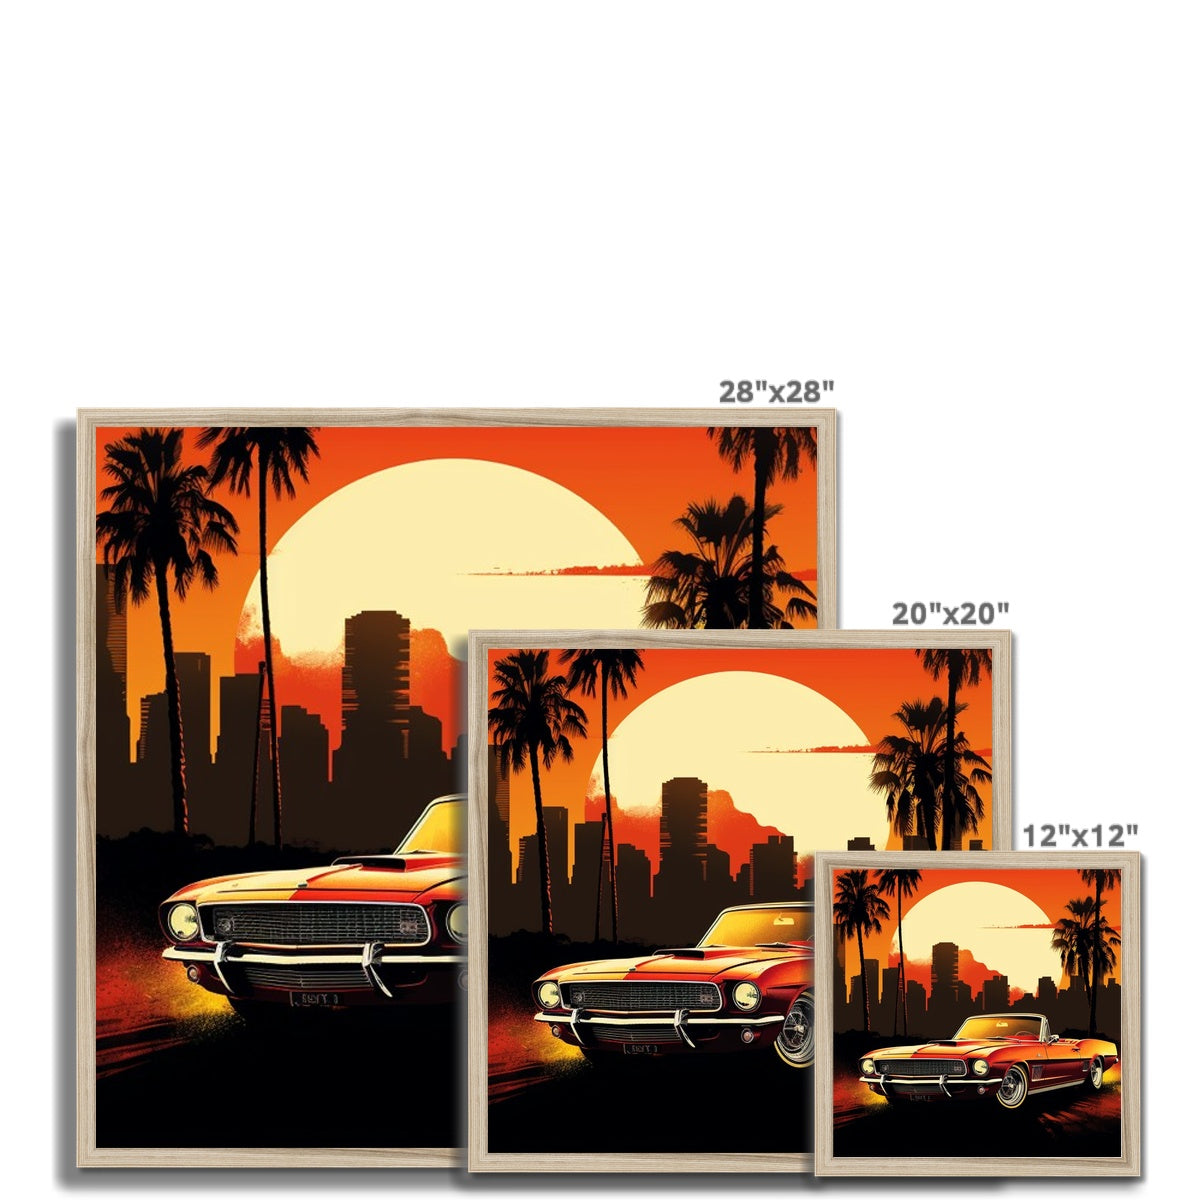 Classic Mustang, Los Angeles Skyline Backdrop Framed Print